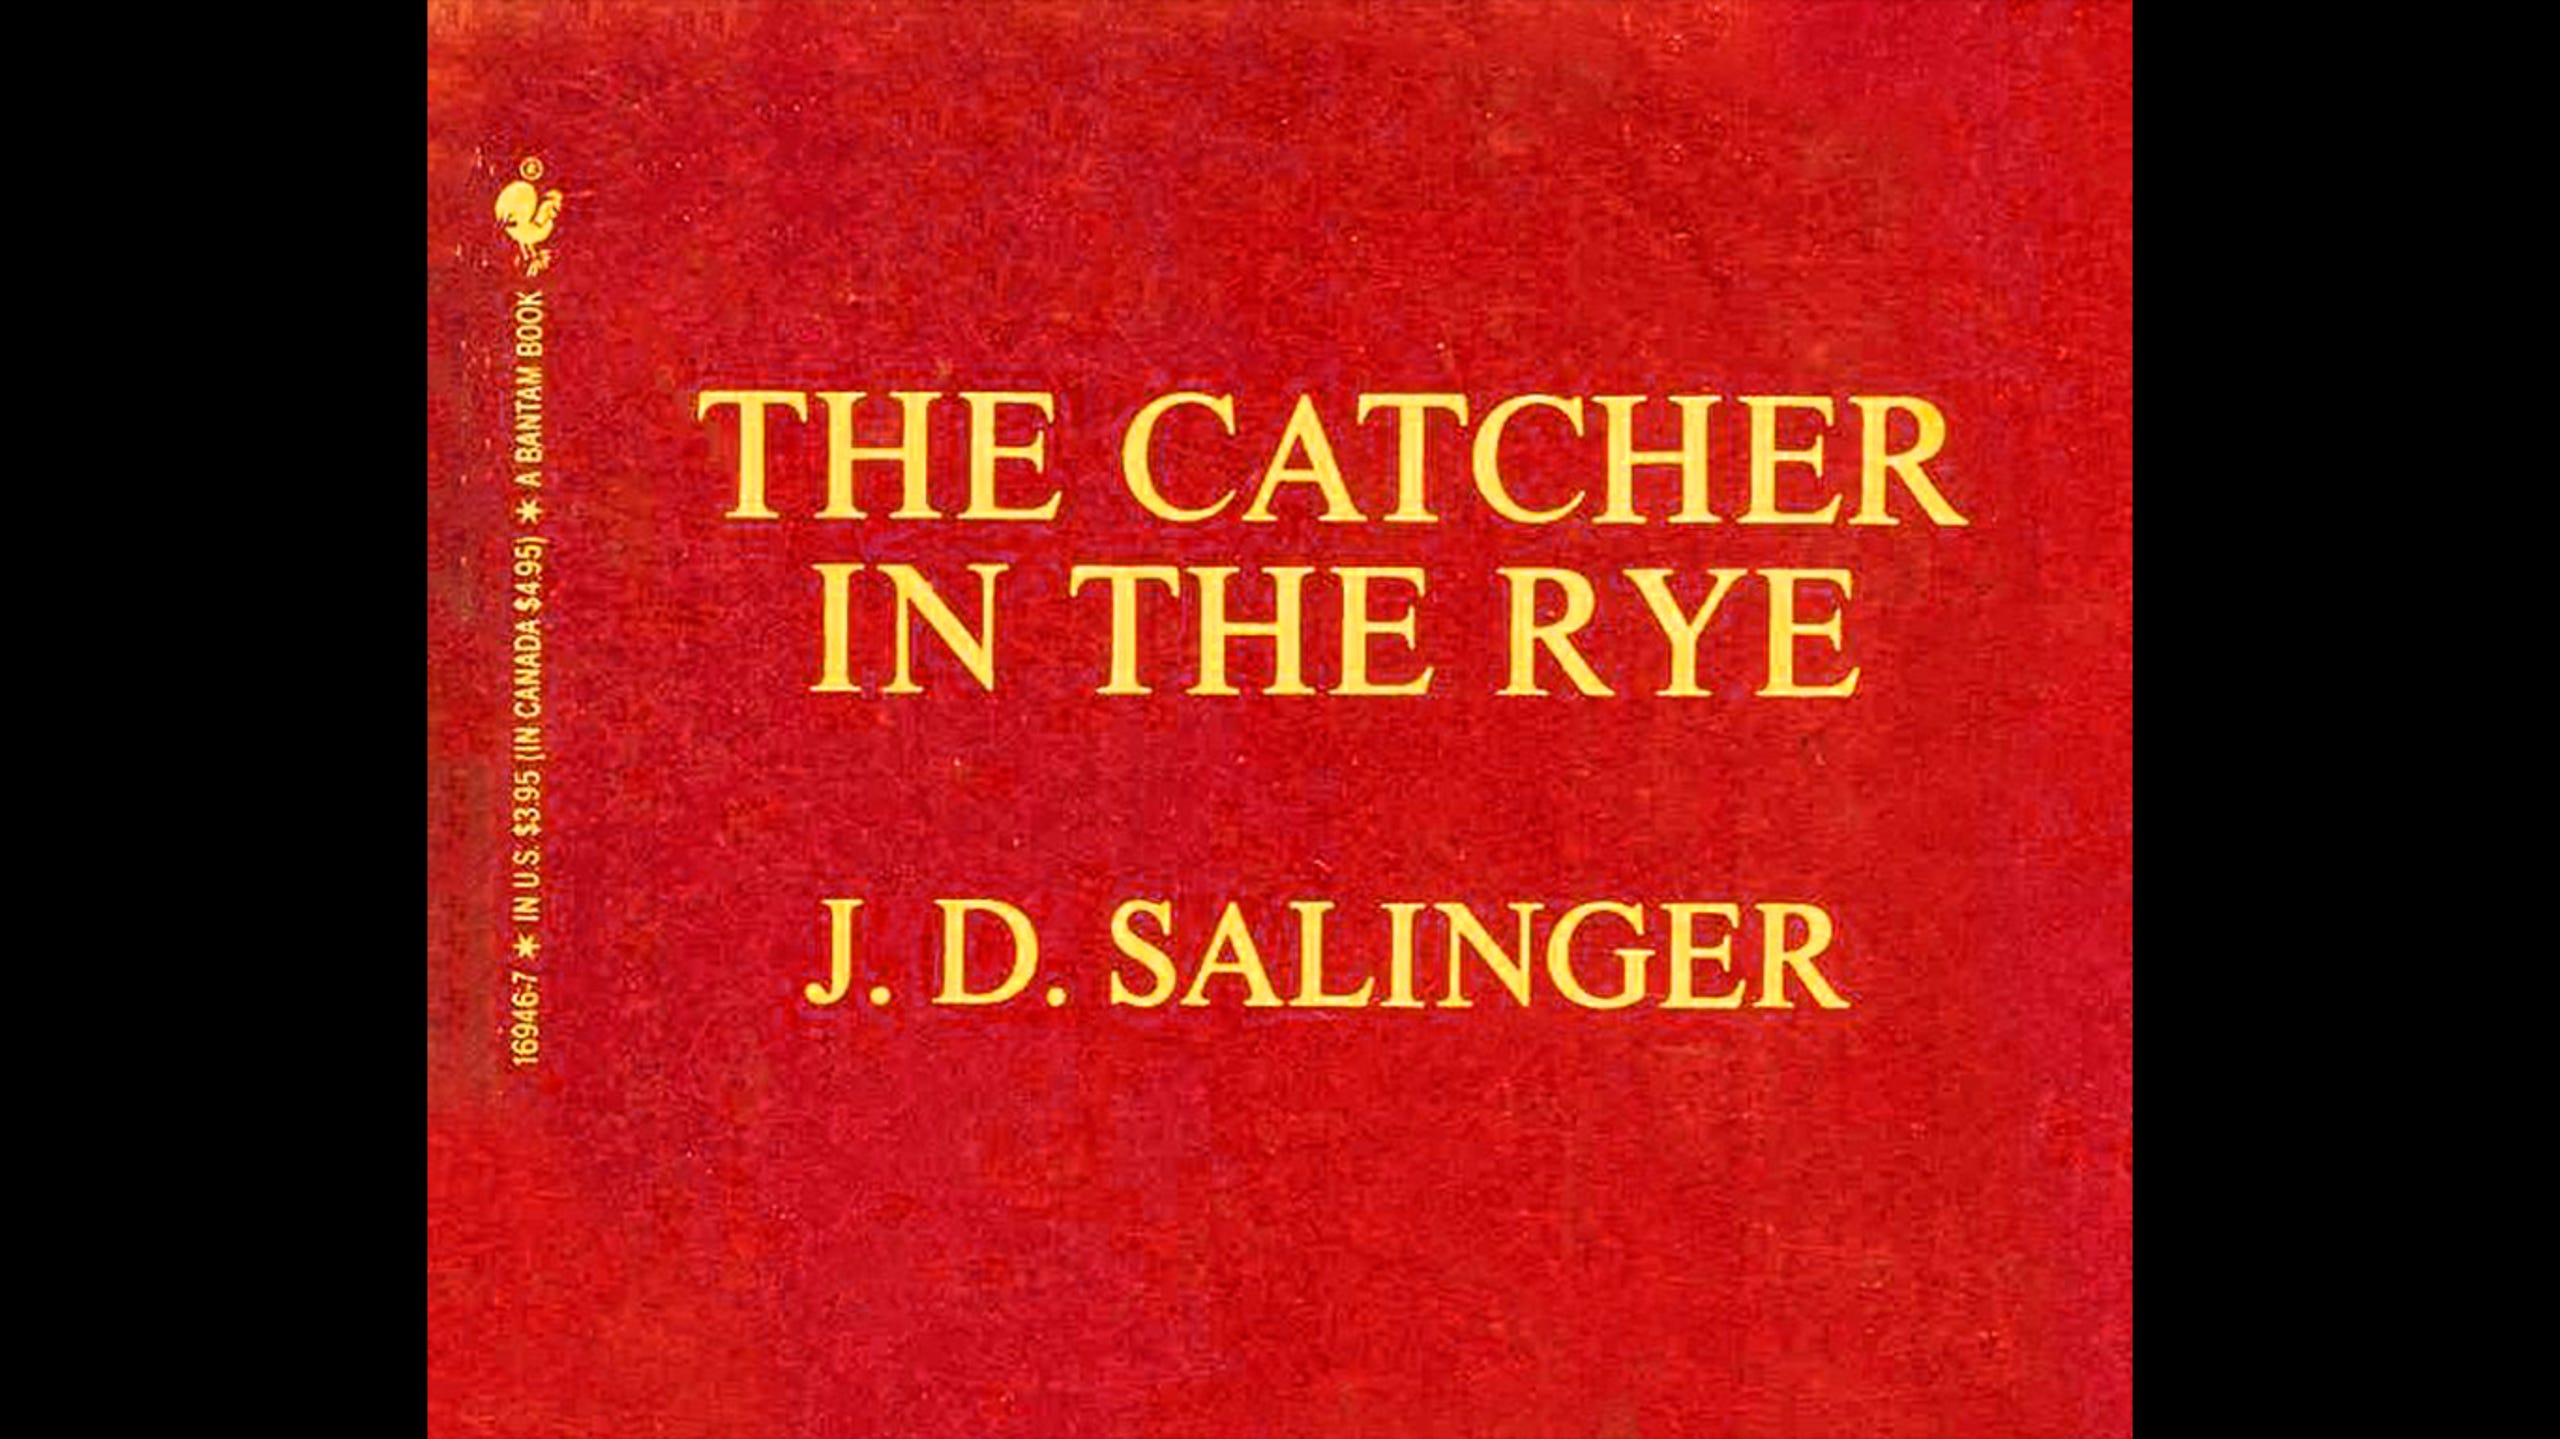 <strong>11. The Catcher in the Rye </strong><strong>• Author:</strong> J.D. Salinger <strong>• Originally published in:</strong> 1951 <strong>• </strong>Many people first read "The Catcher in the Rye" in high school. It resonates with students perhaps because the main character is himself an adolescent. The fact that it's written in a conversational, and thus accessible style, also helps. "A brilliant coming-of-age story that despite being somewhat dated perhaps remains a stylistic and linguistic marvel at capturing the way teenagers think and speak," Uruburu said.